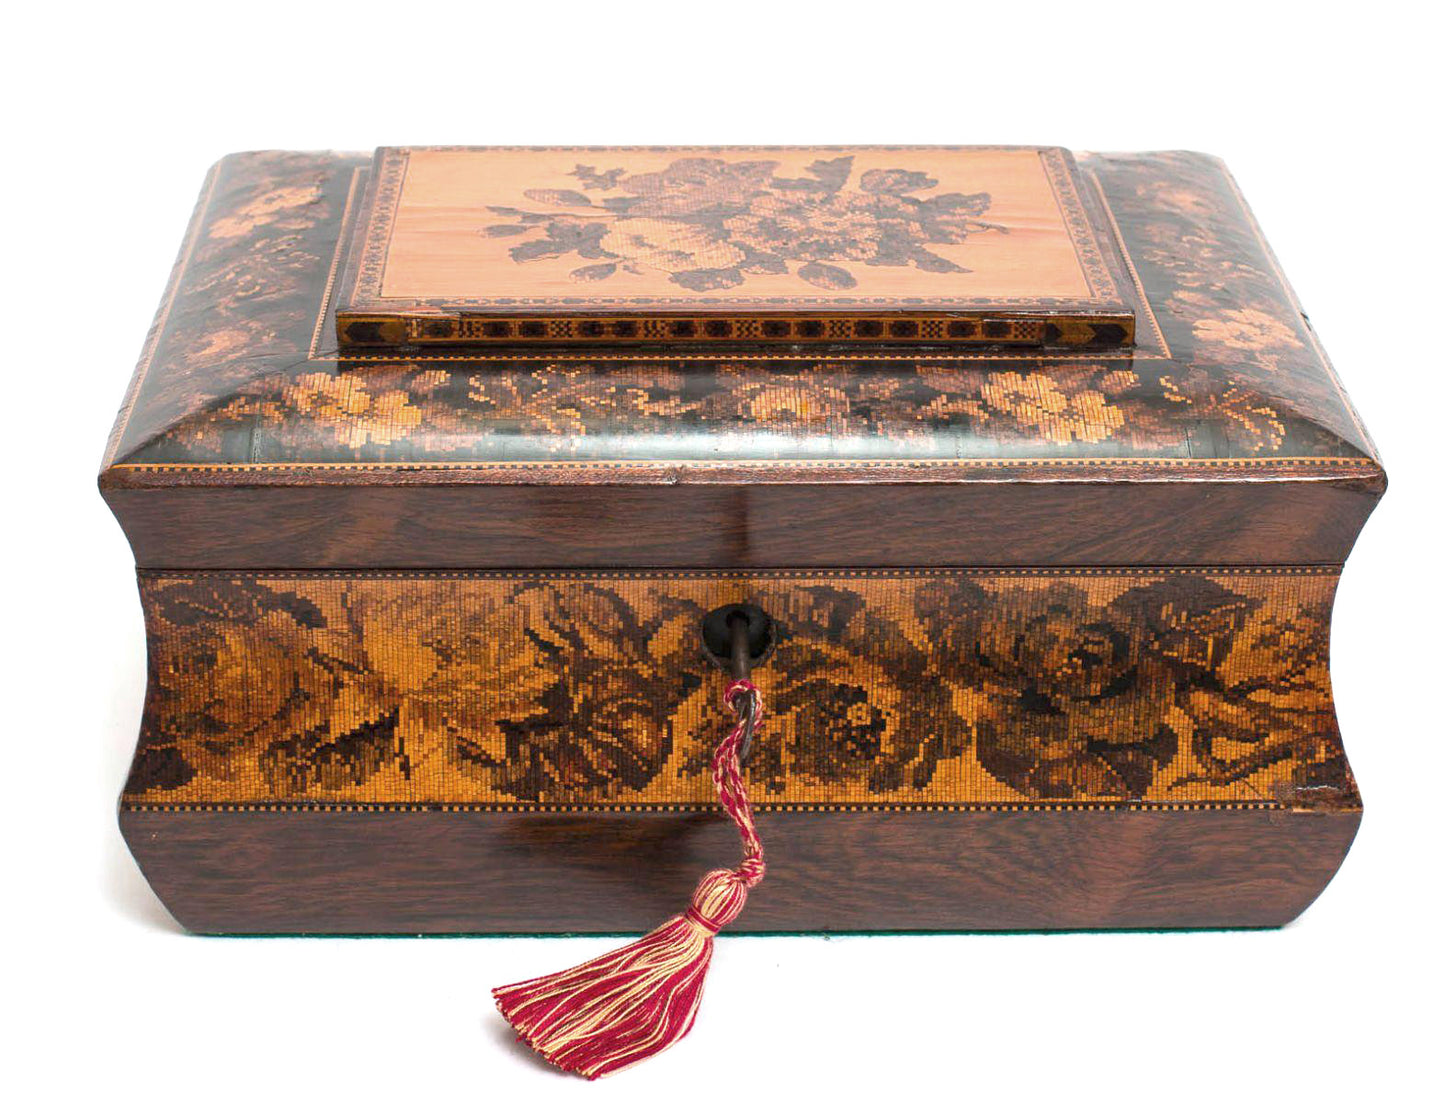 Rare Victorian Antique Tunbridge Ware Wooden Sewing Work Box Inlaid with Roses - Code (8202)